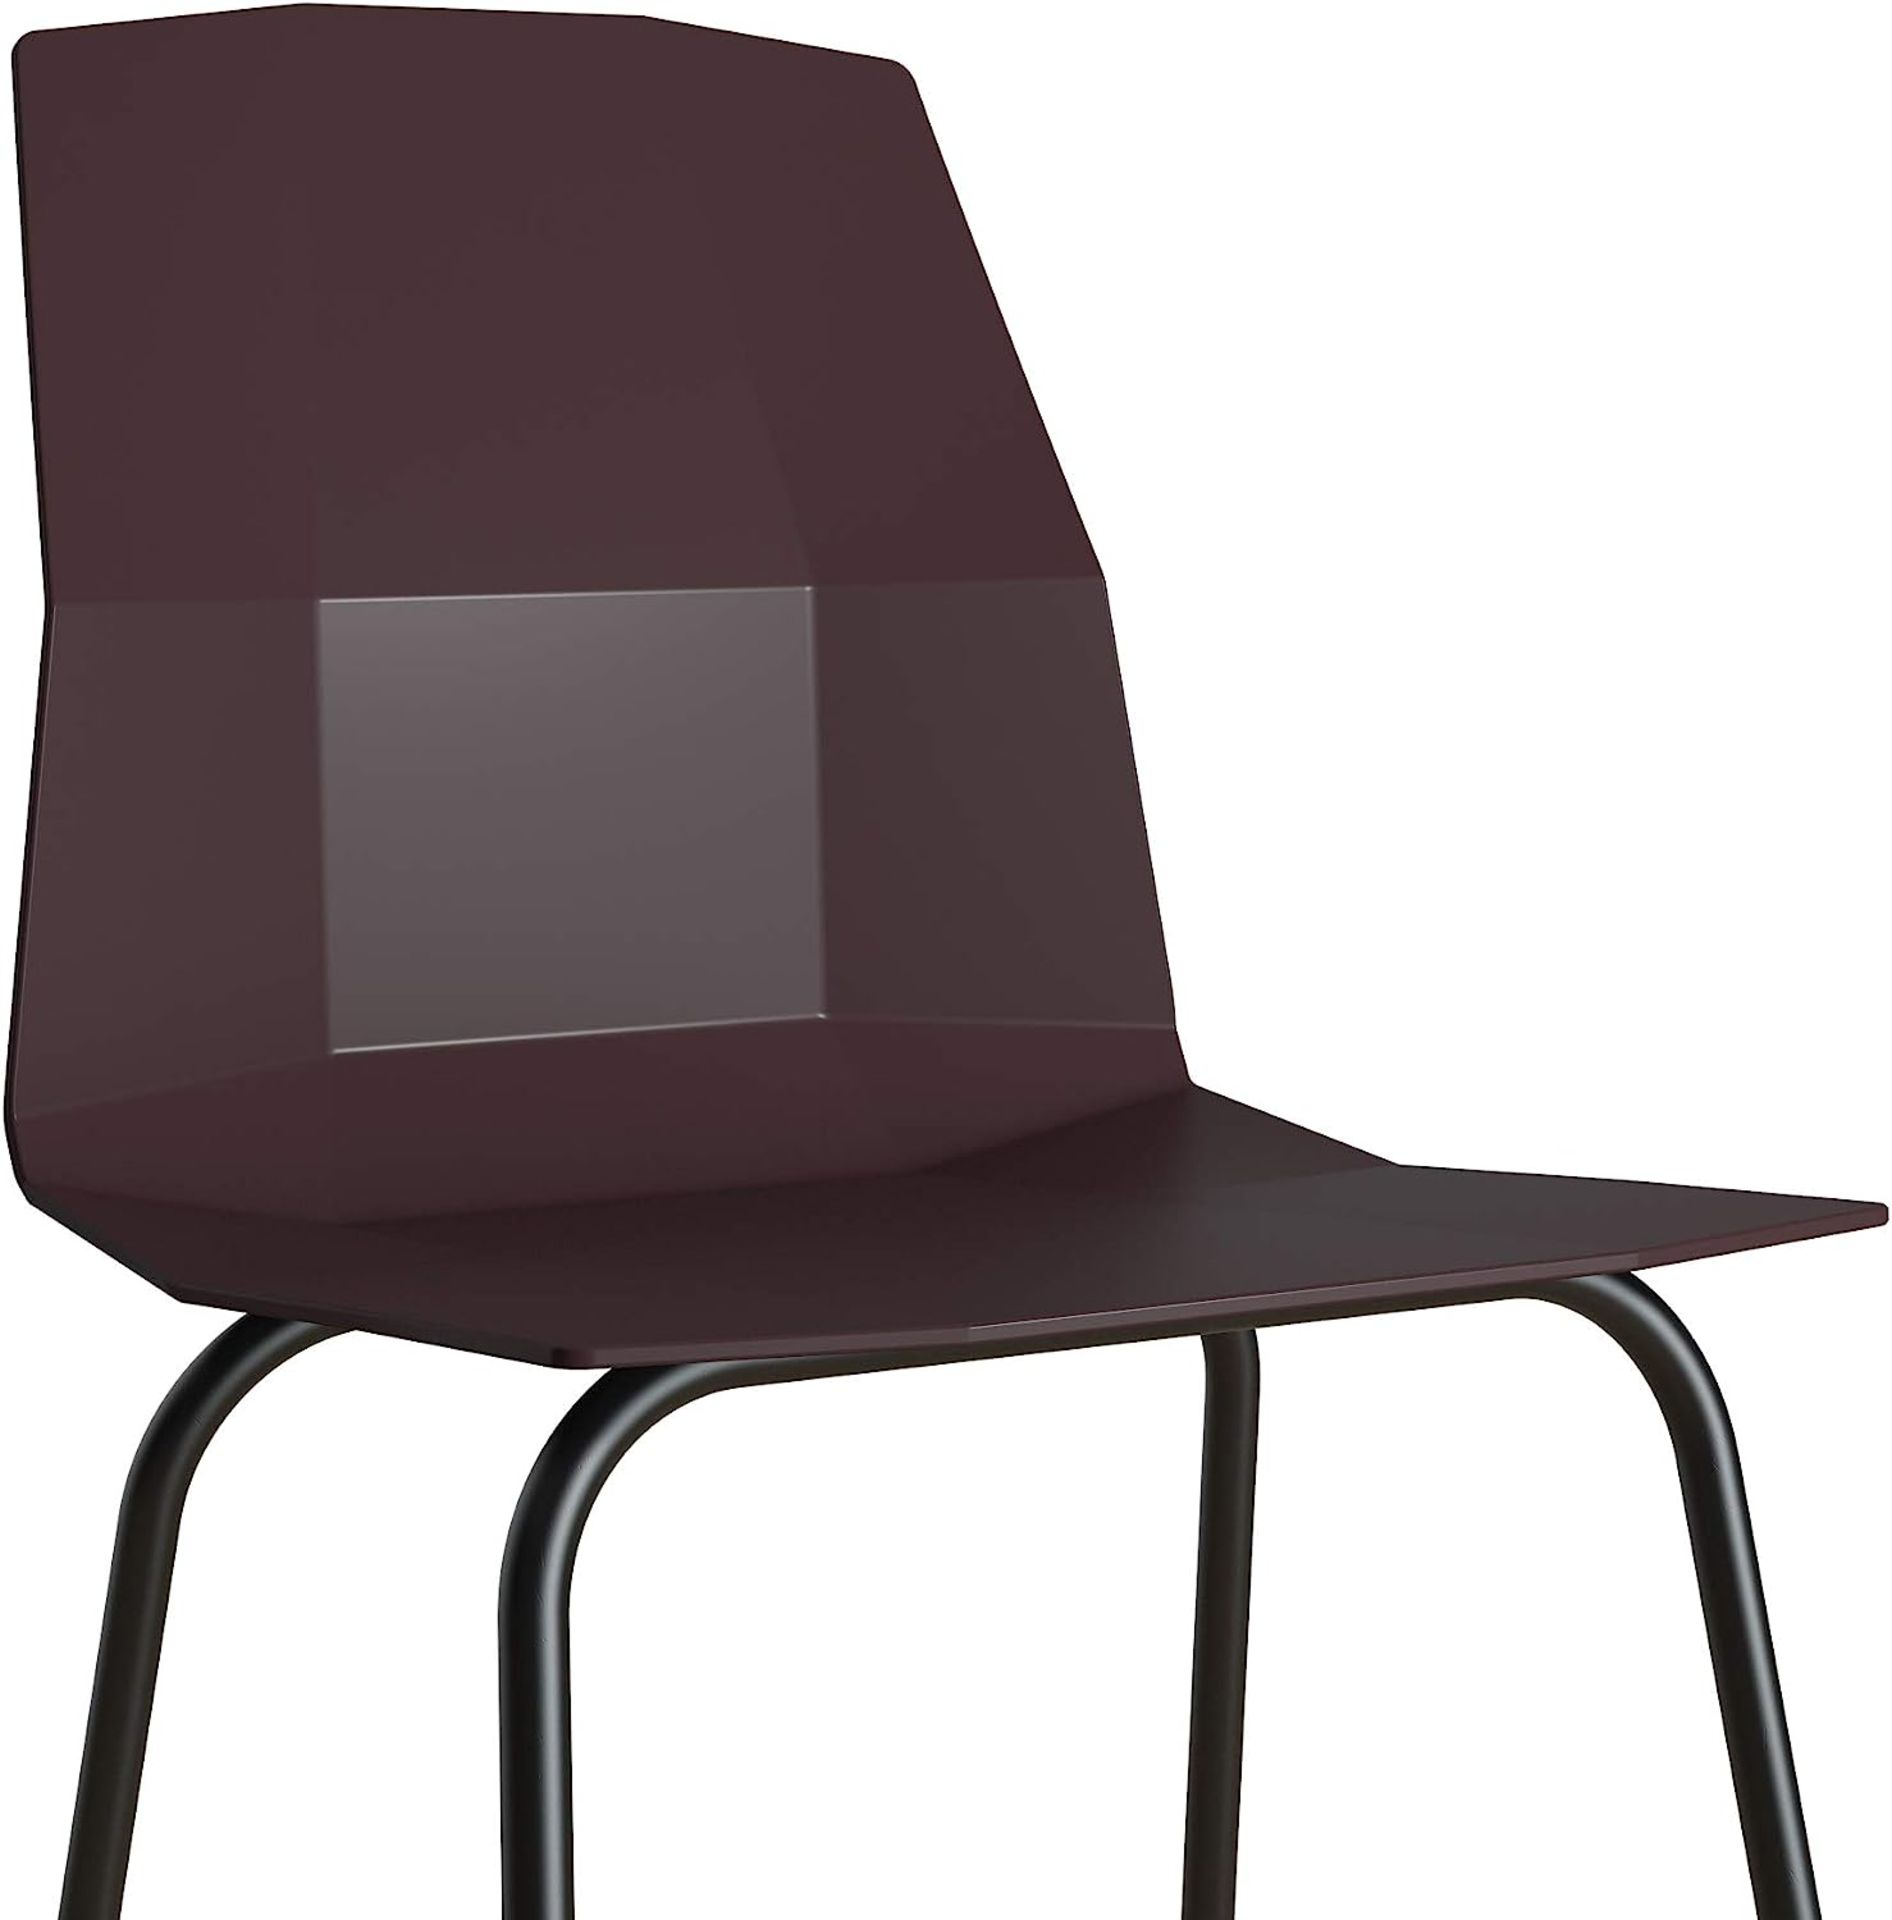 2 X Brand New Burgundy CosmoLiving Riley Dining Chair, Who needs ordinary when your home décor can